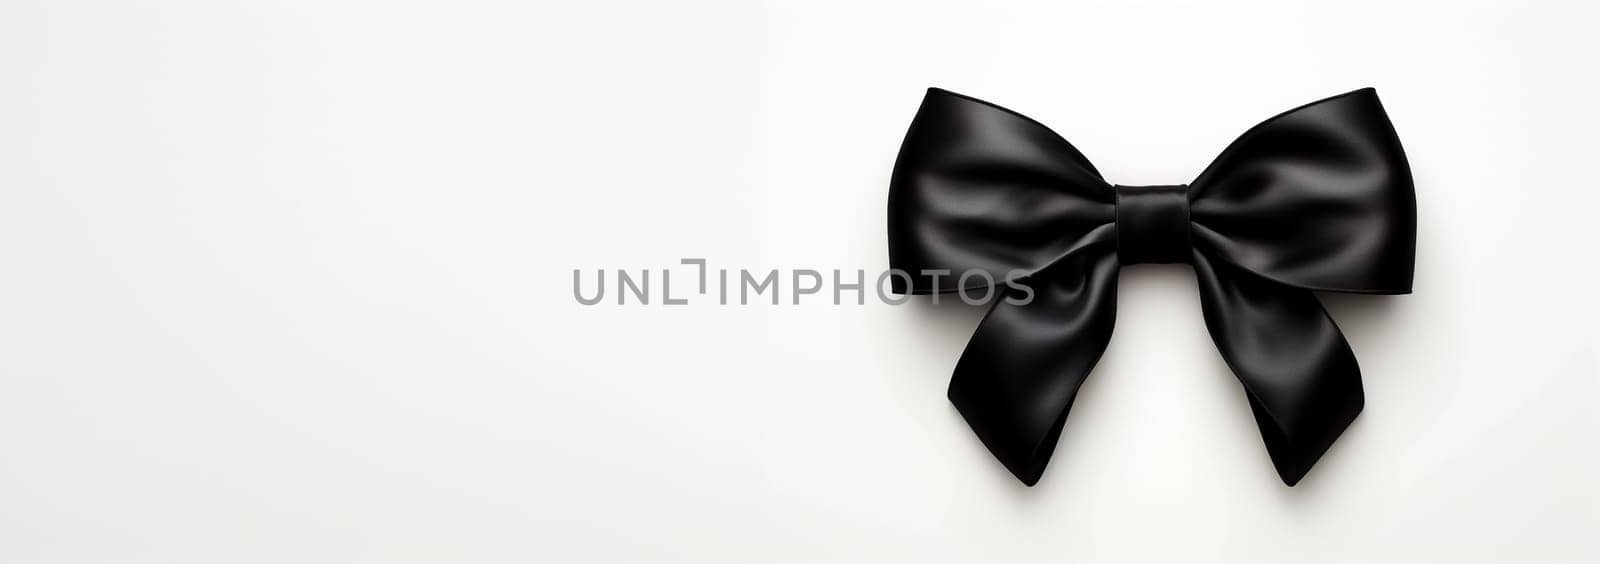 Banner Black bow horizontal ribbon realistic shiny satin for decorate your greeting card or website isolated on white background. Festive,black Friday,birthday concept by Annebel146